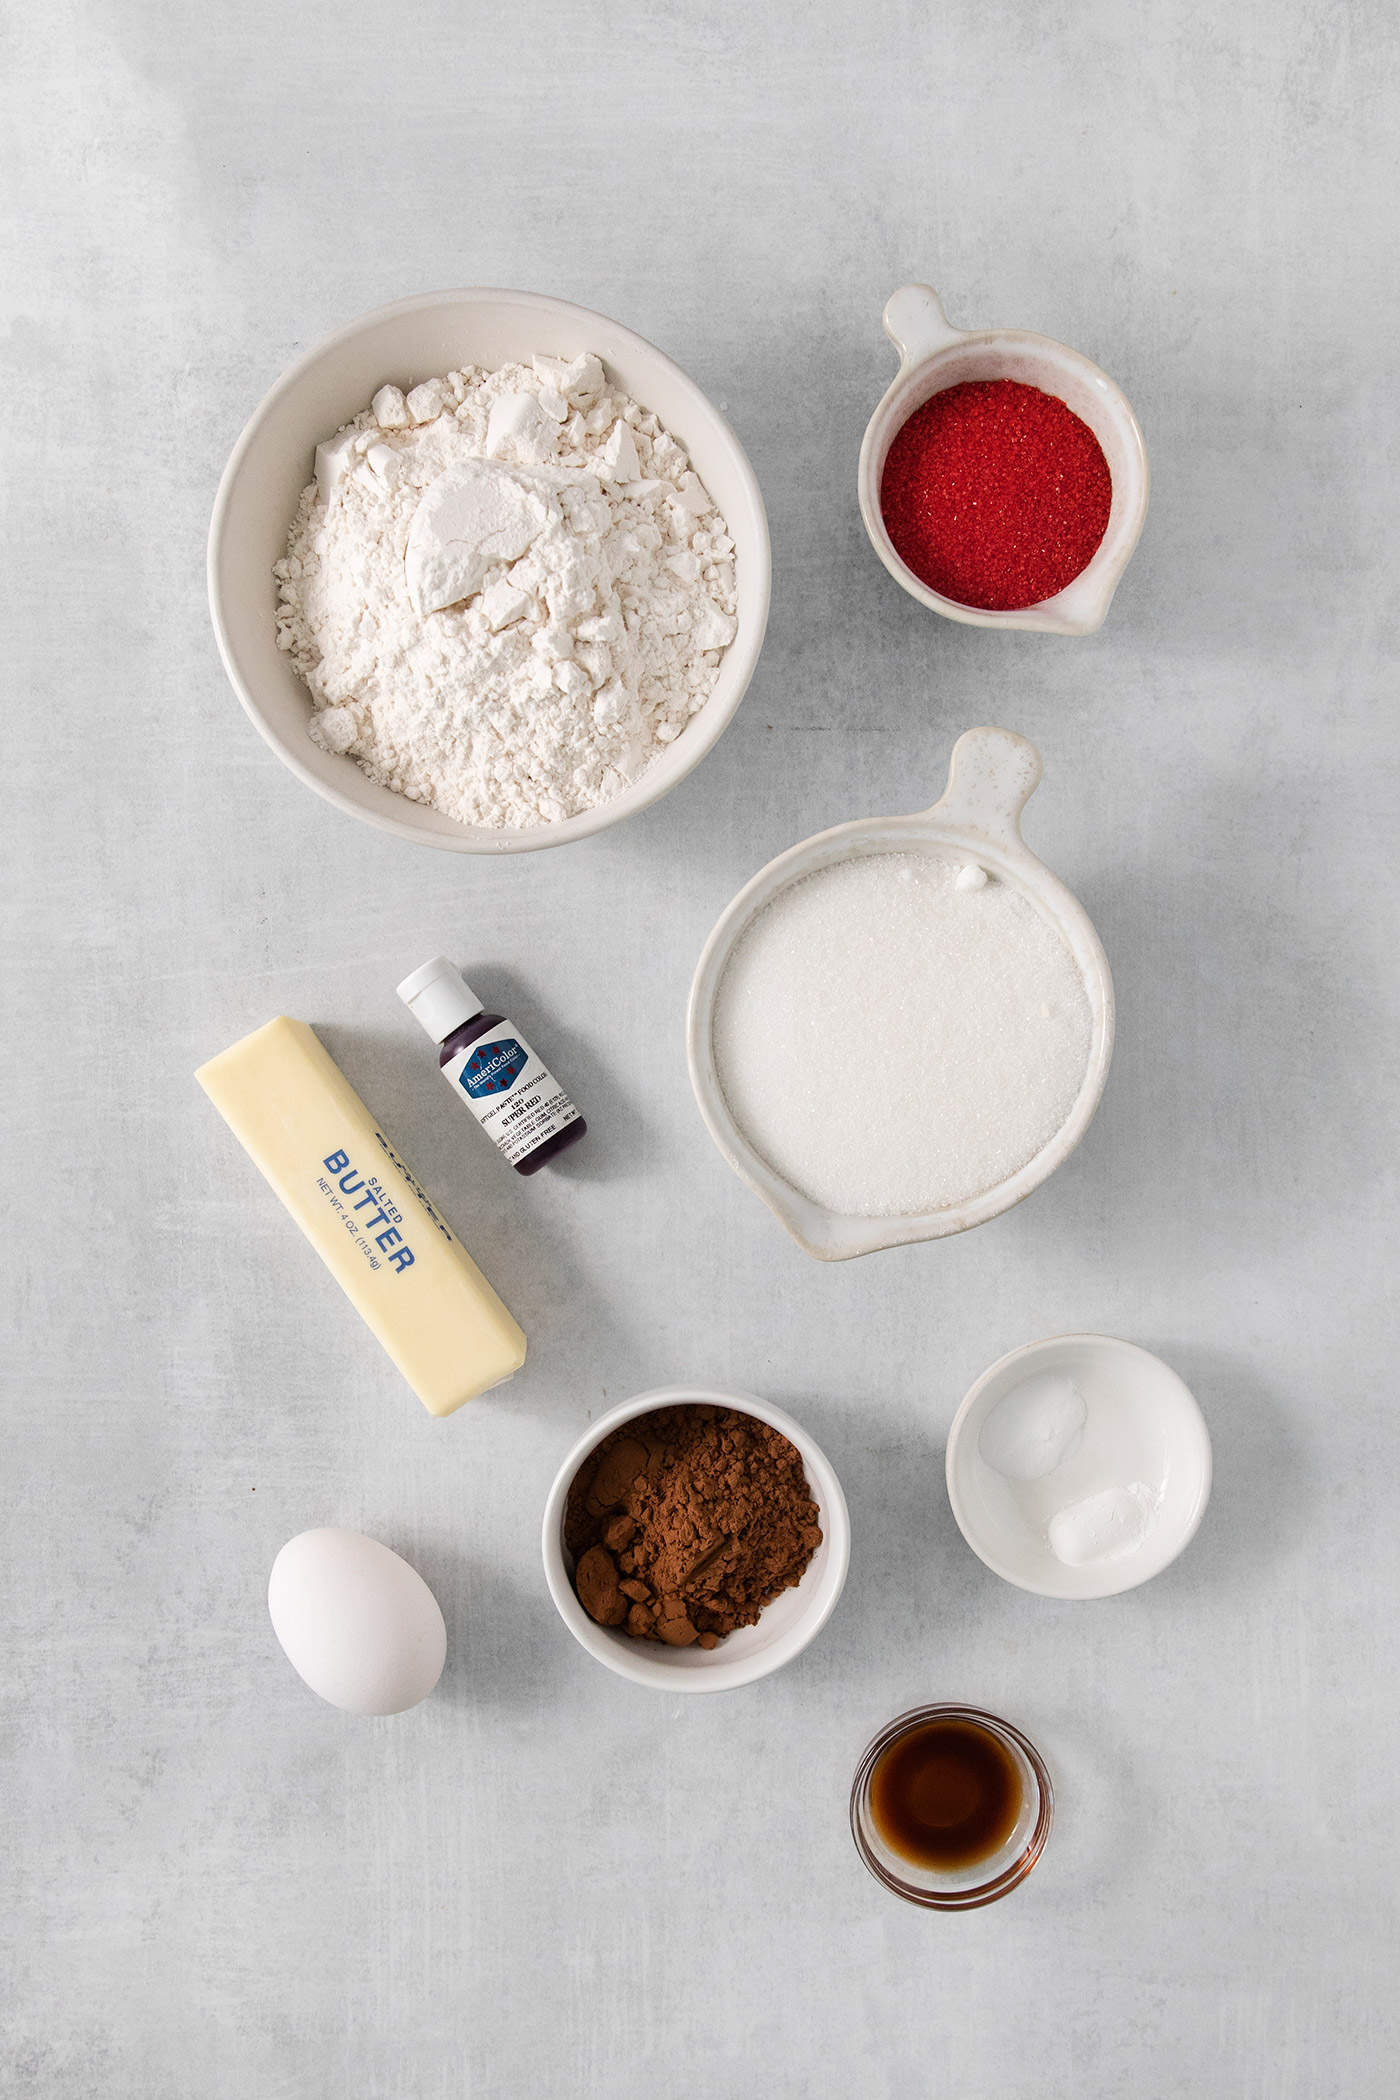 The ingredients to make red velvet cookies are shown portioned out: butter, flour, milk, red food coloring, egg, cocoa powder, vanilla.